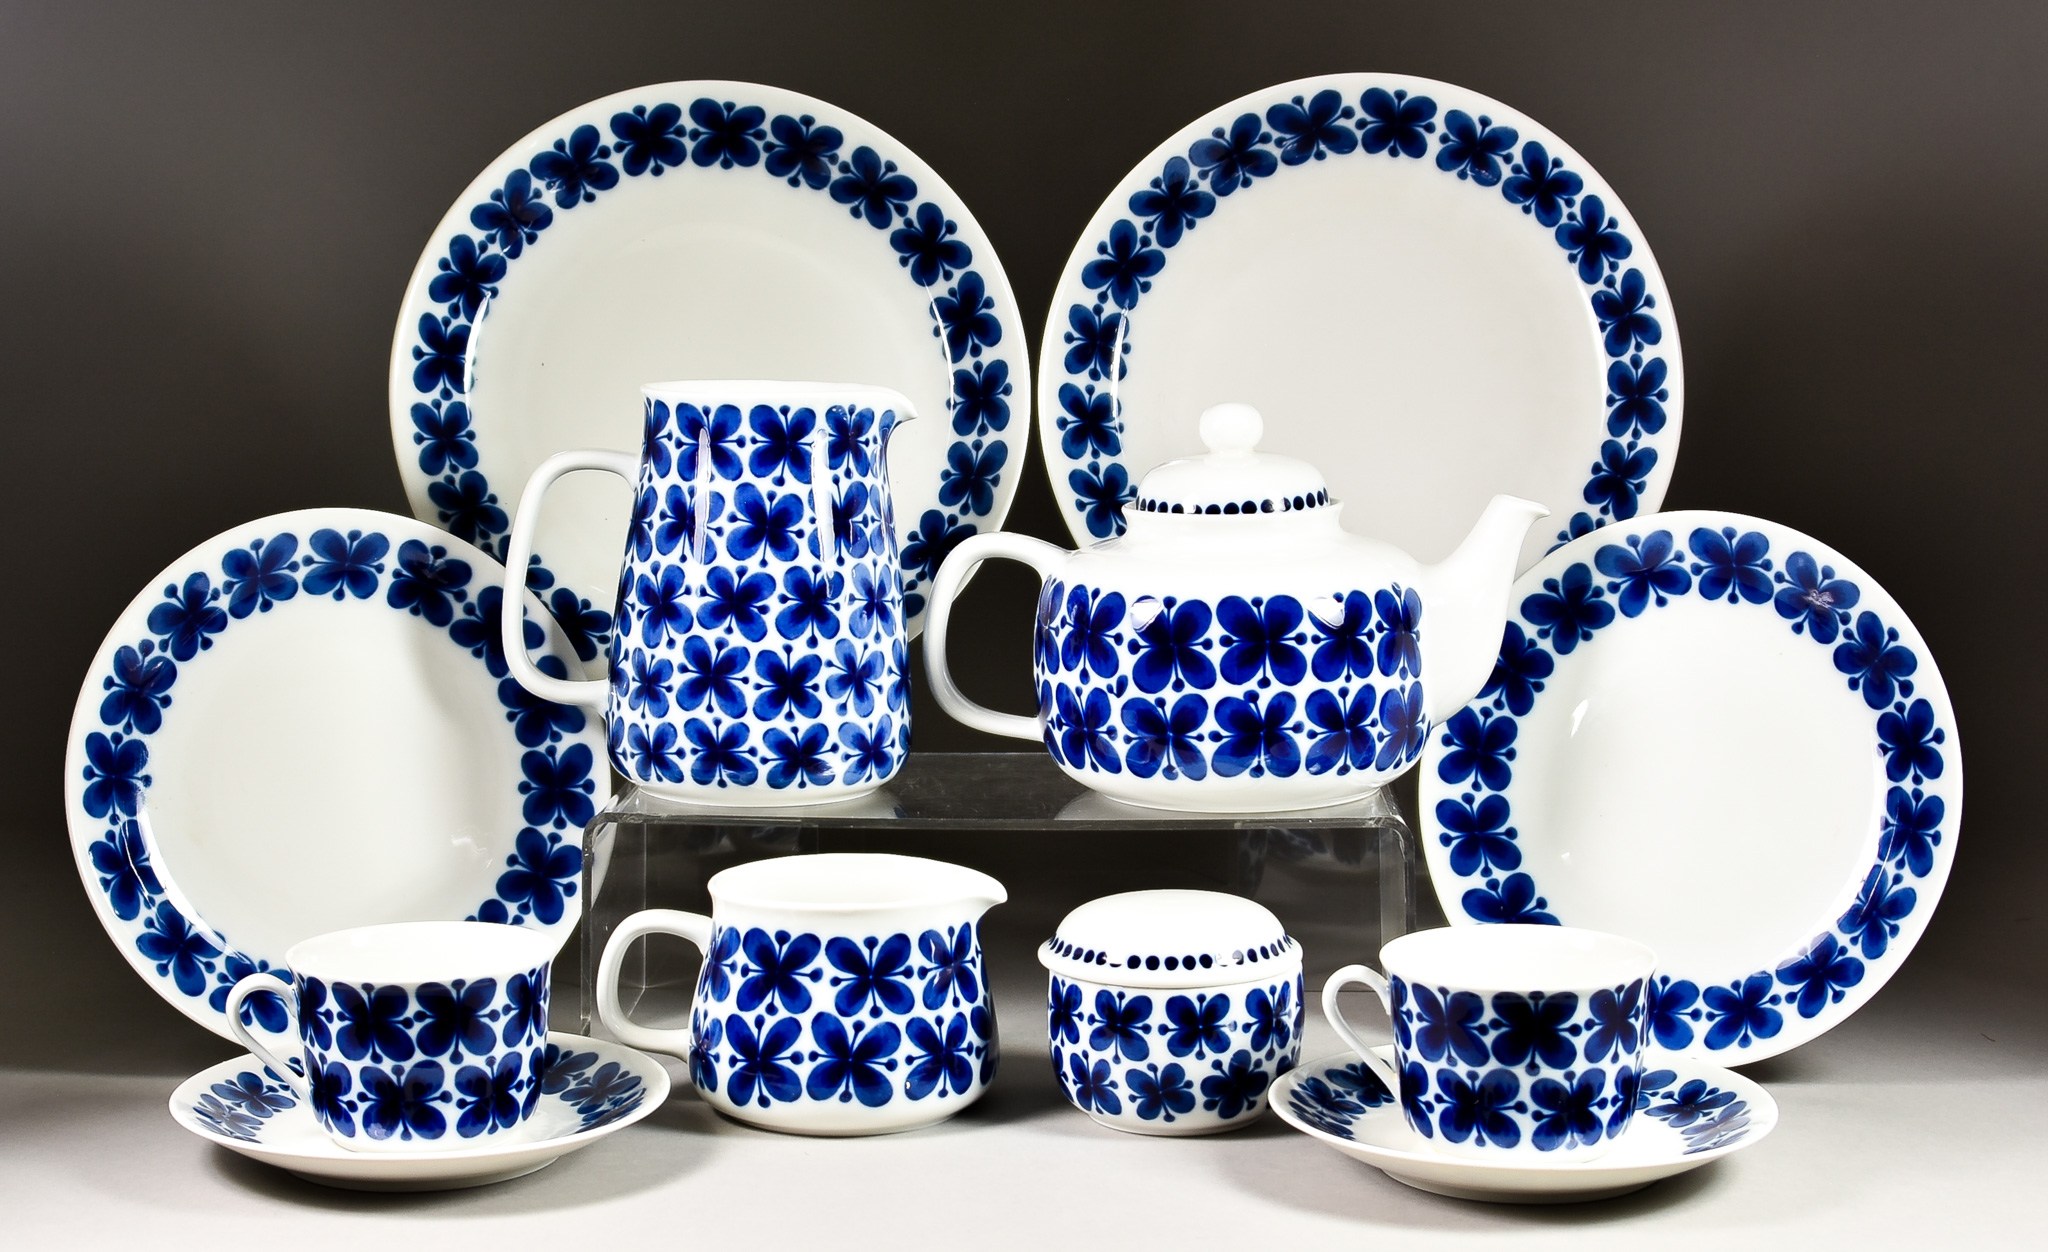 A Rörstrand Part Dinner and Tea Service in Mon Amie Pattern, Mid-Late 20th Century, designed by